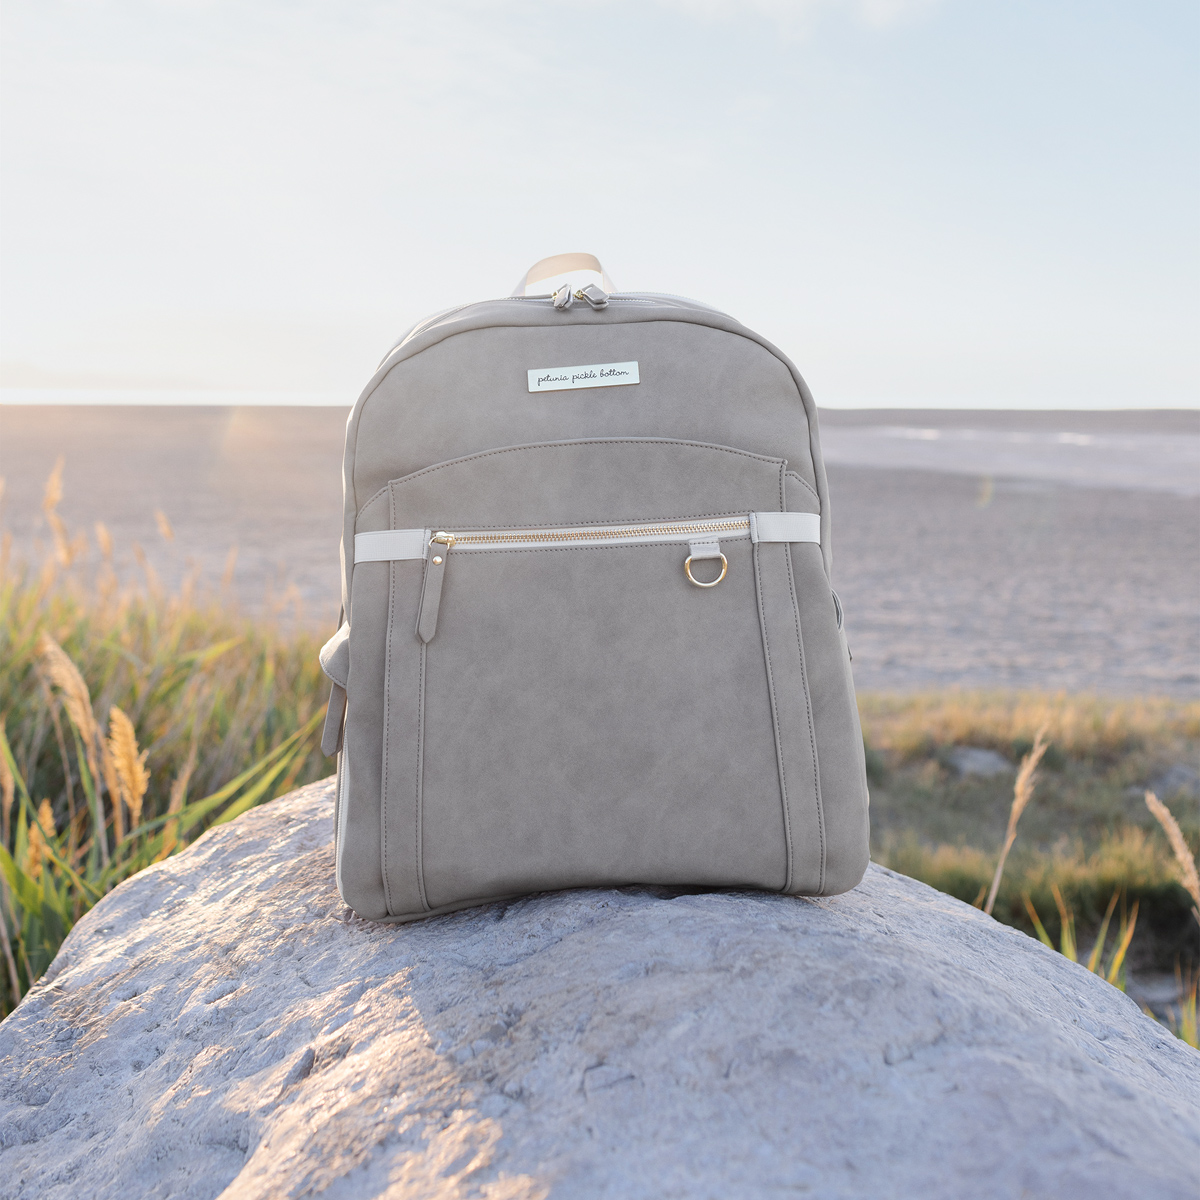 provisions backpack in grey matte leatherette